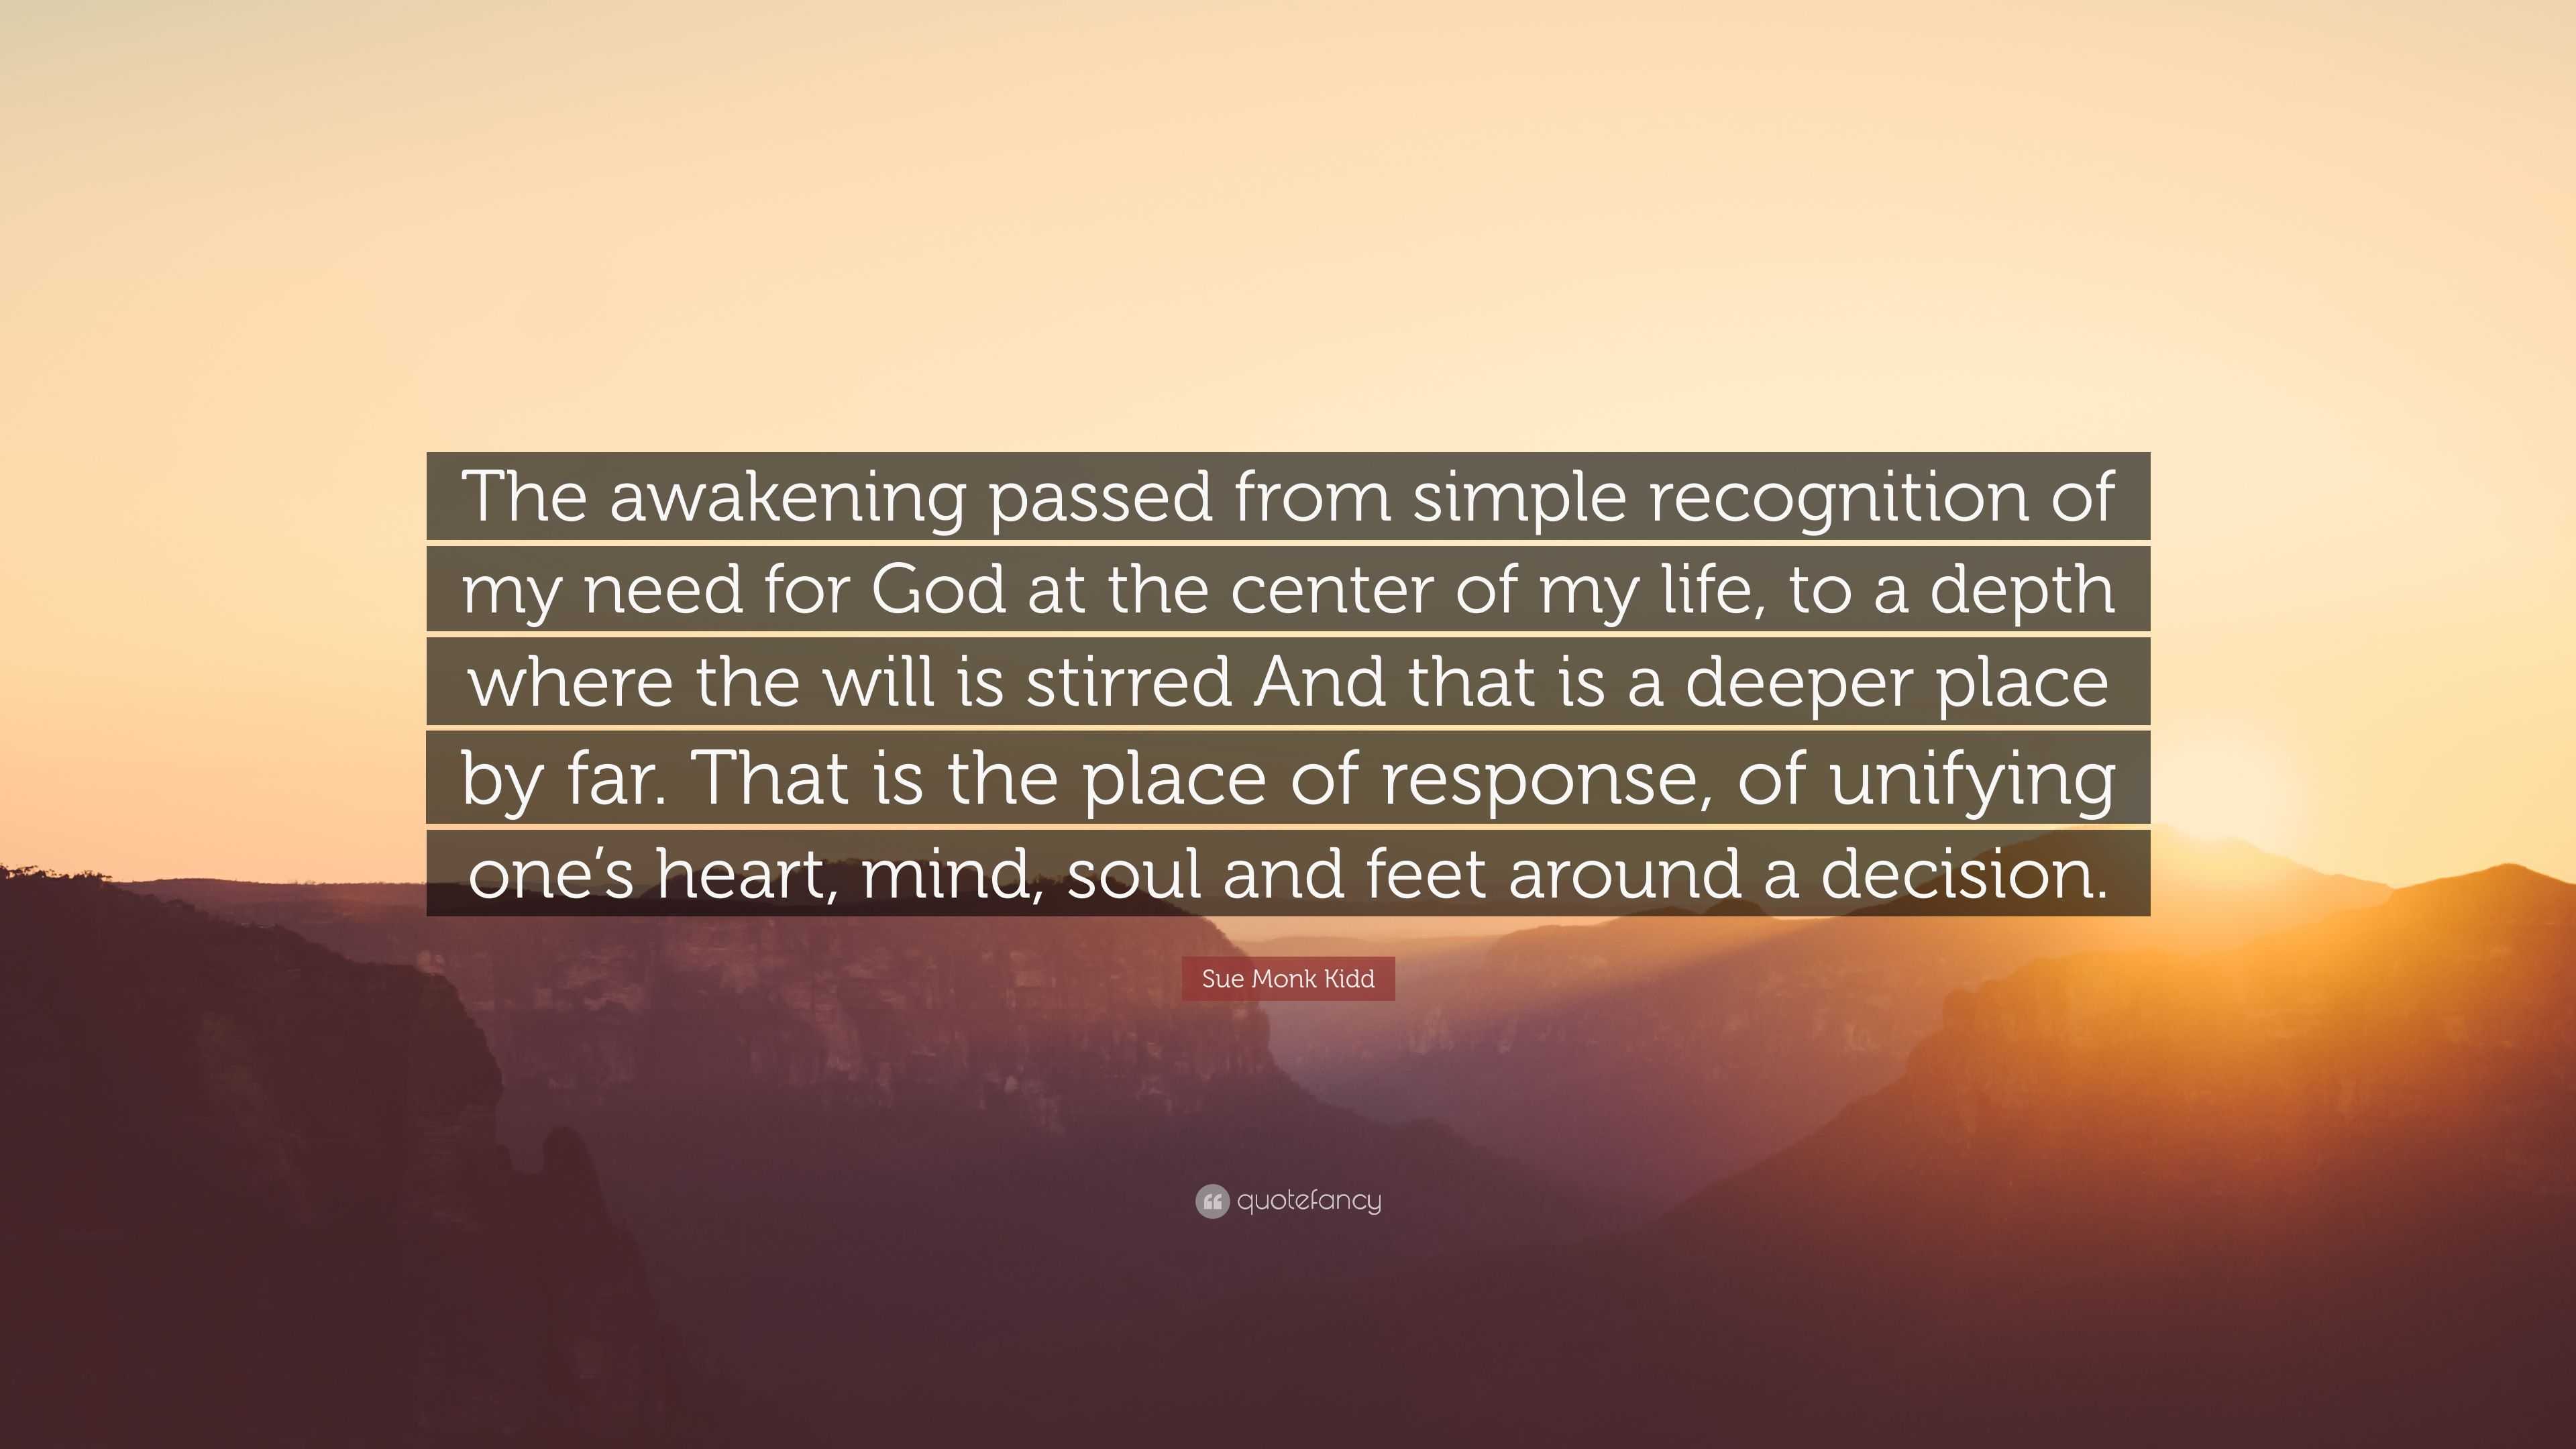 Sue Monk Kidd Quote “The awakening passed from simple recognition of my need for